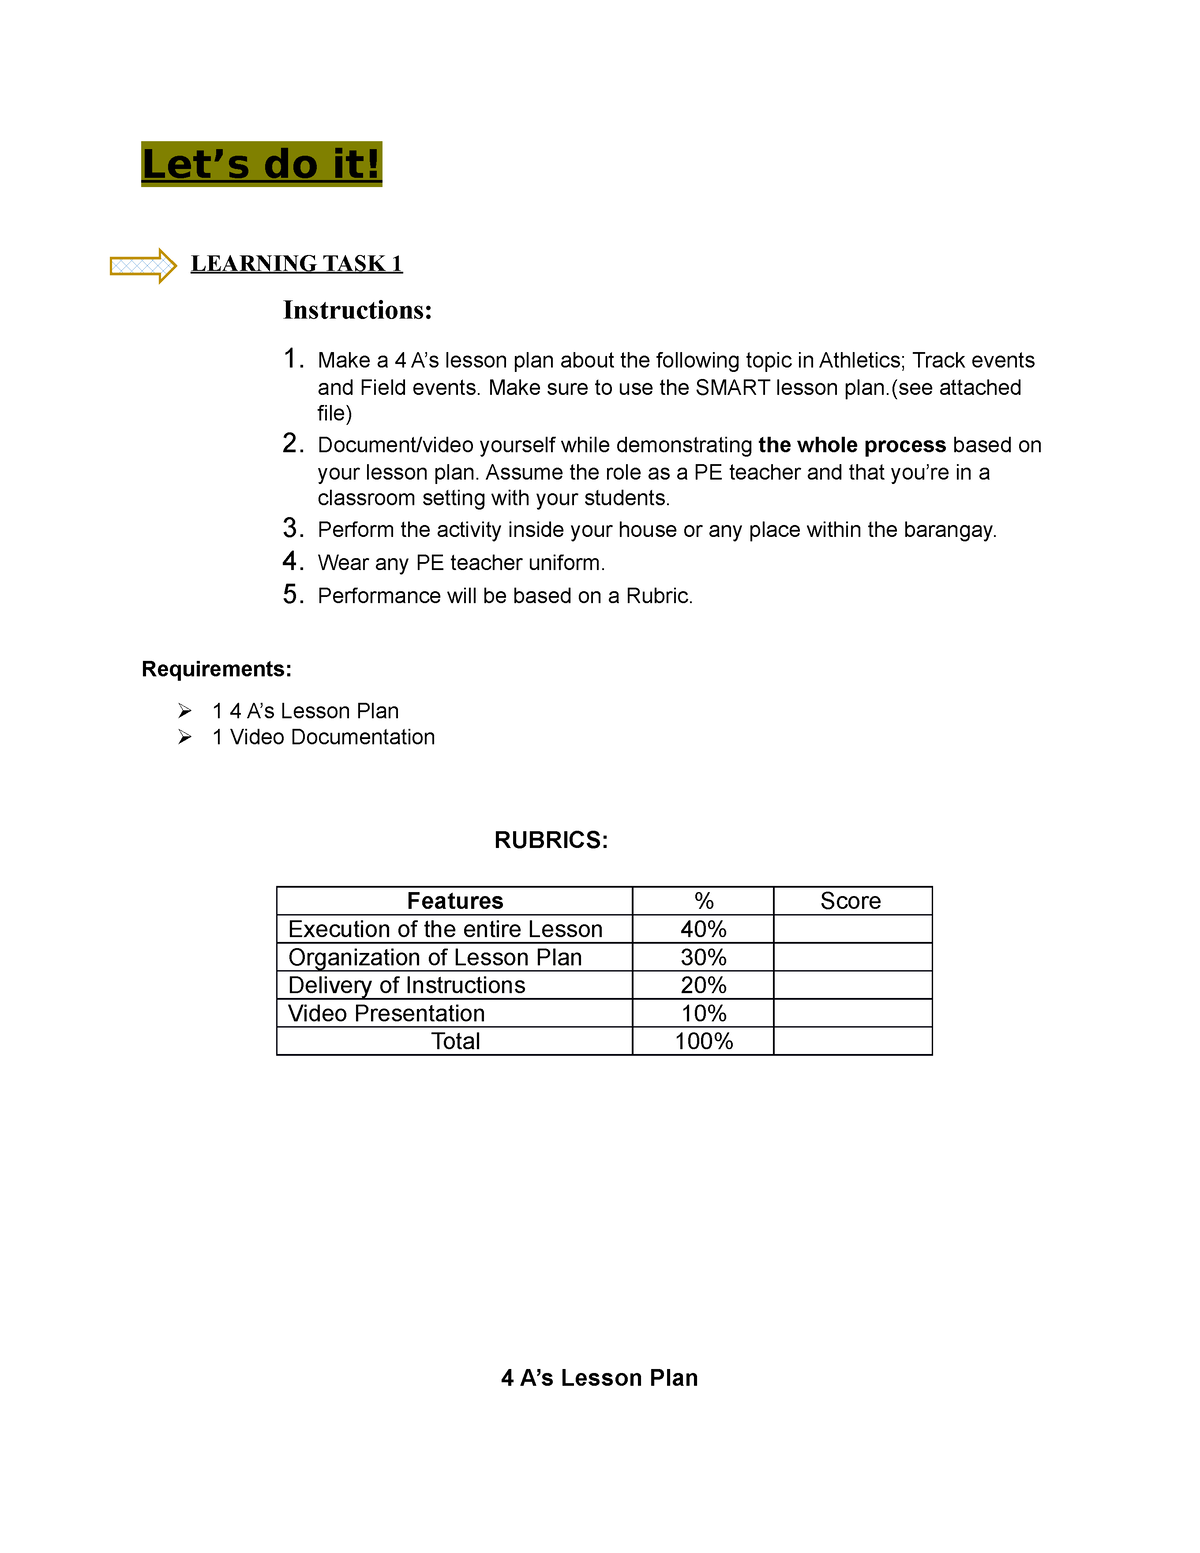 4a 4as Lesson Plan Sample Lets Do It Learning Task 1 Instructions